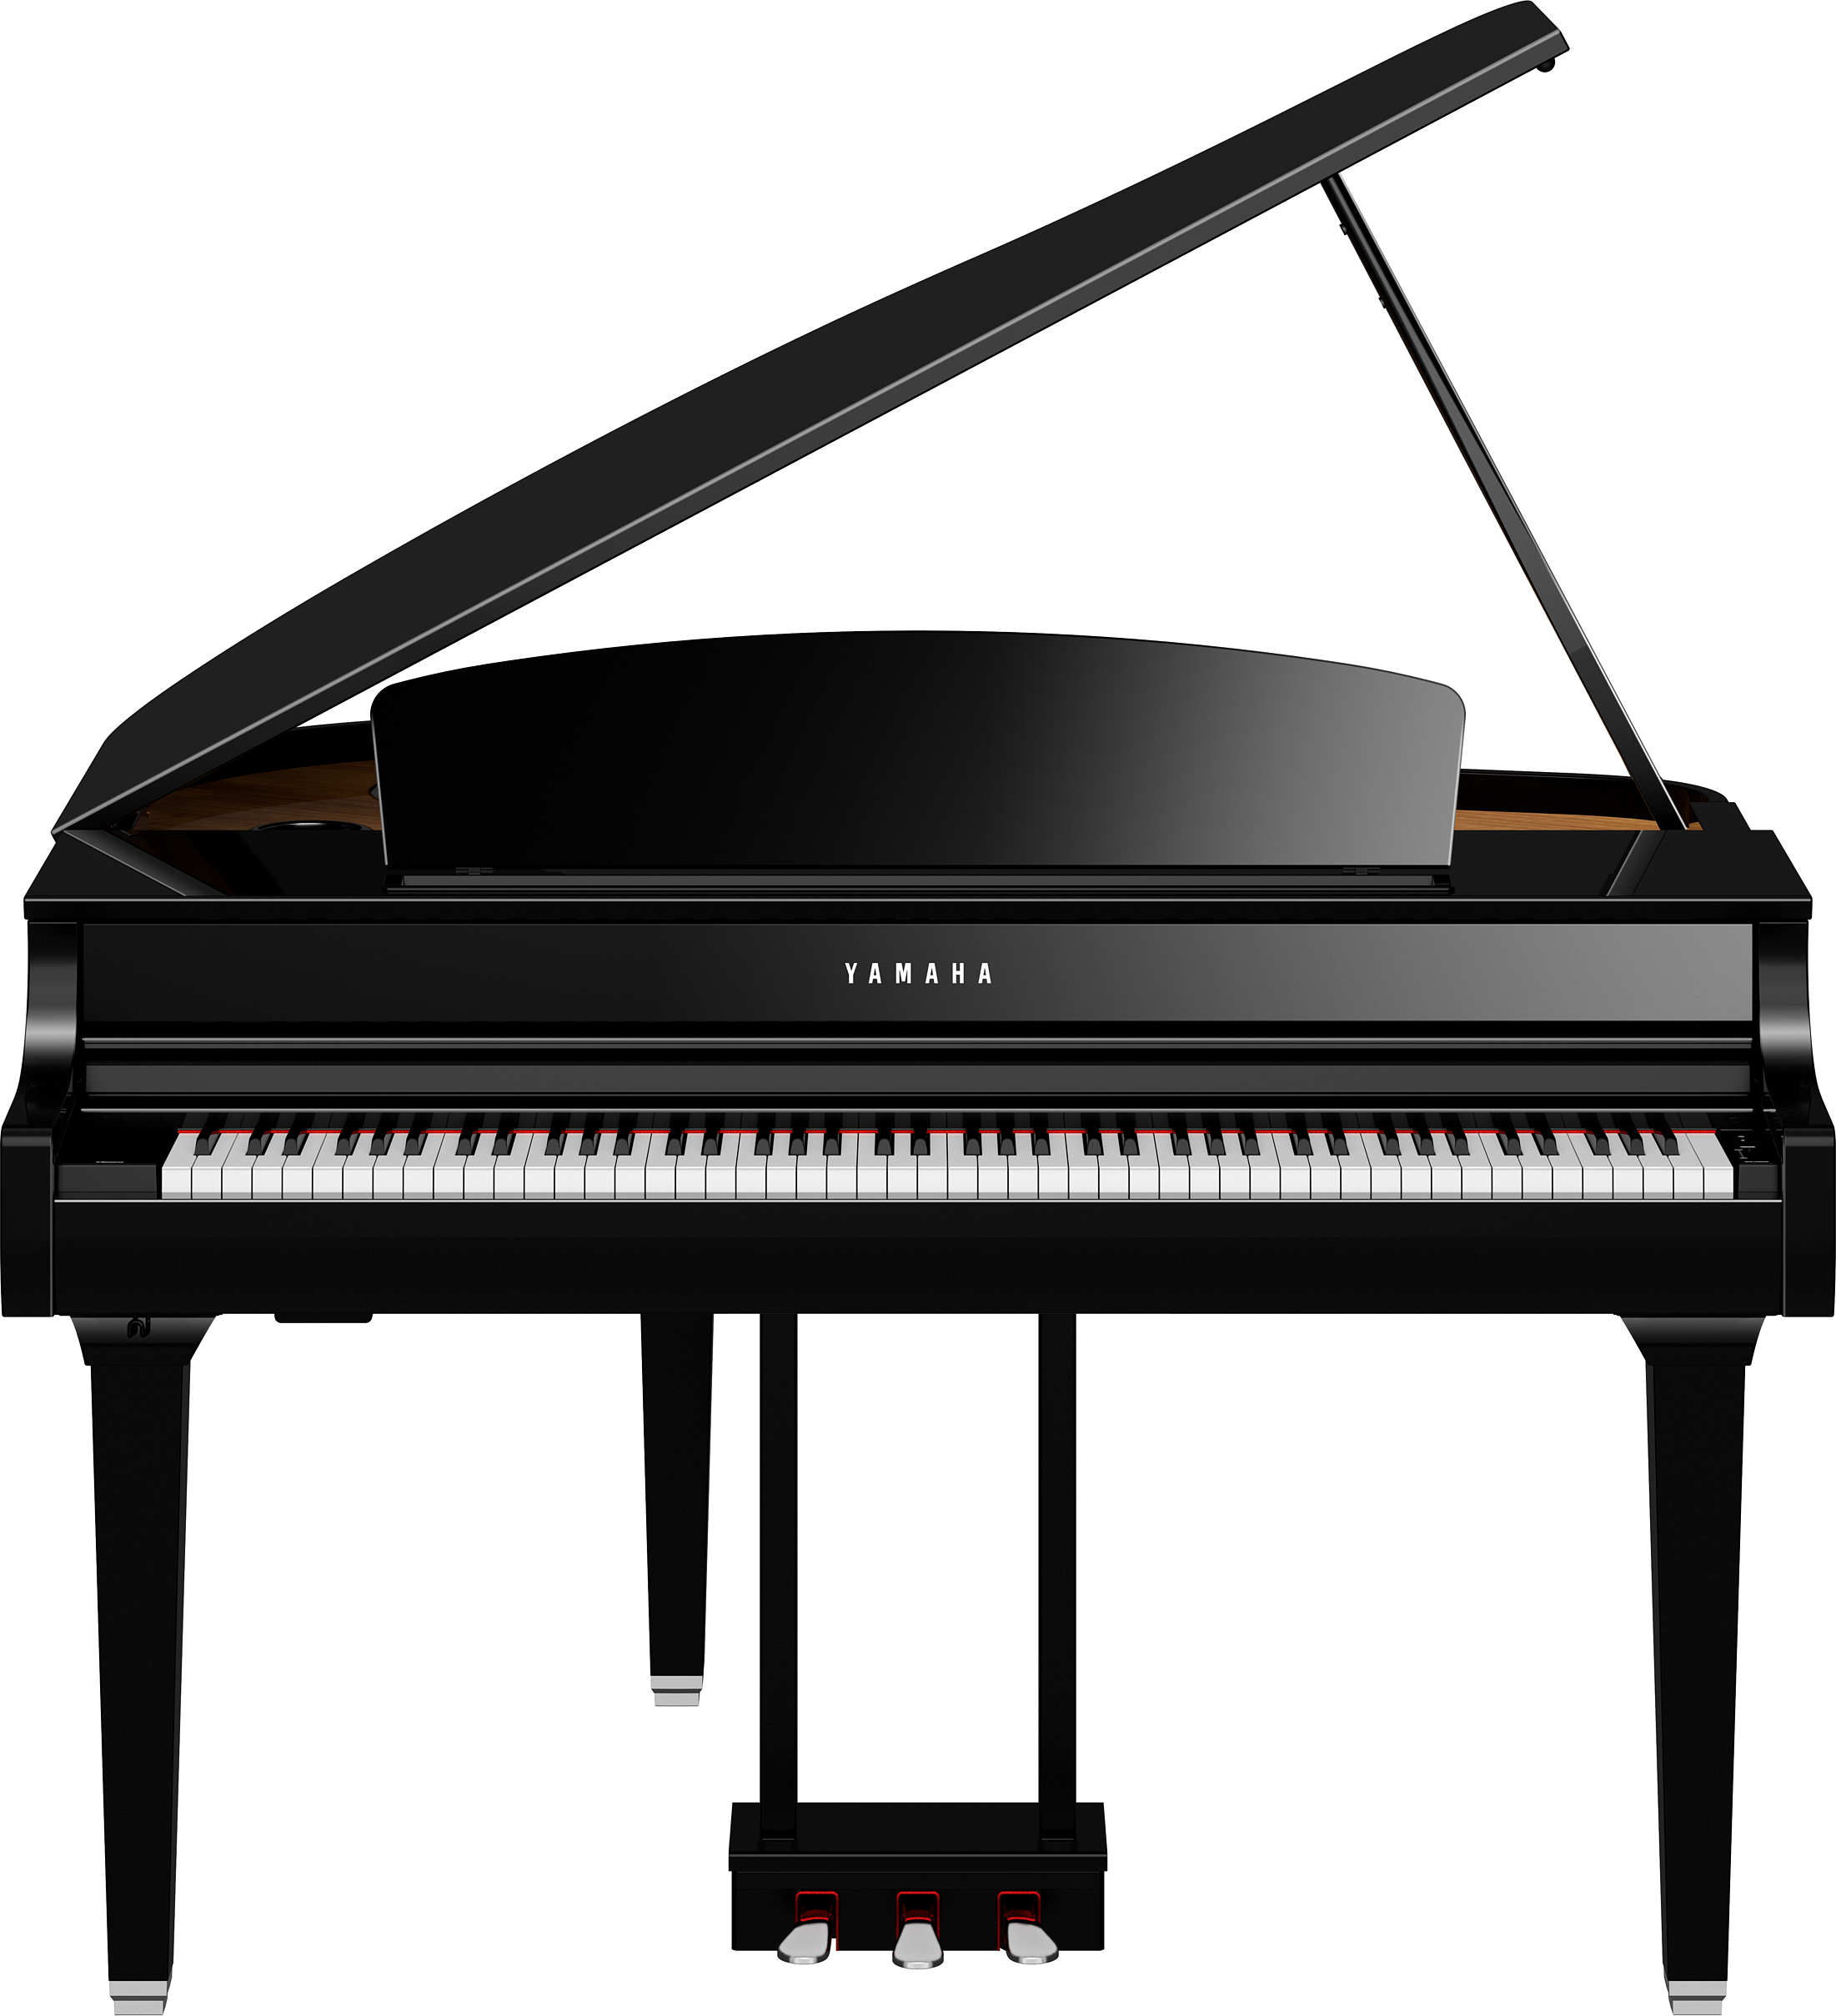 Yamaha Clp 795 Gp - Digital piano with stand - Main picture